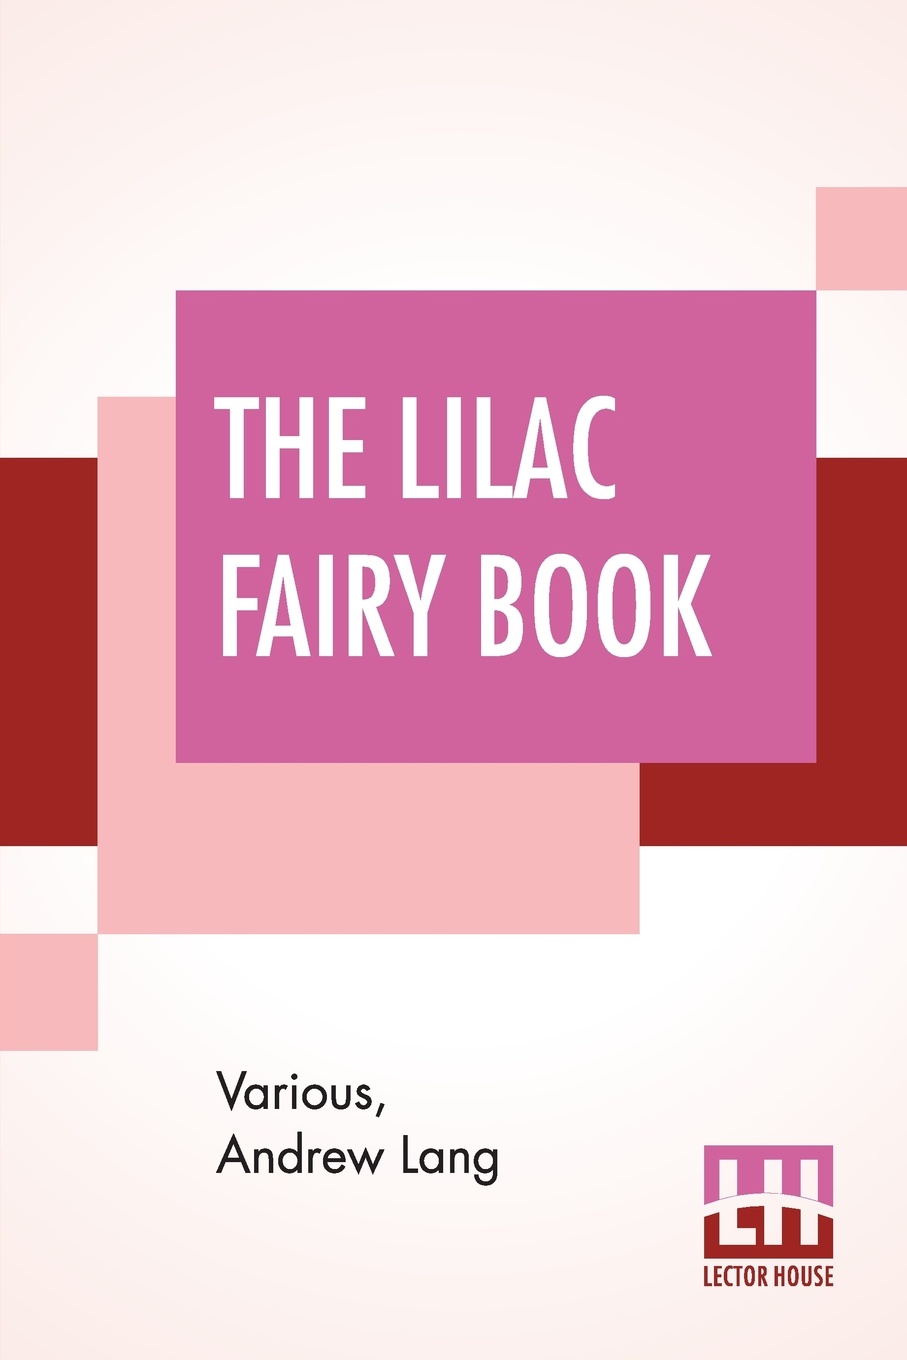 The Lilac Fairy Book. Edited By Andrew Lang